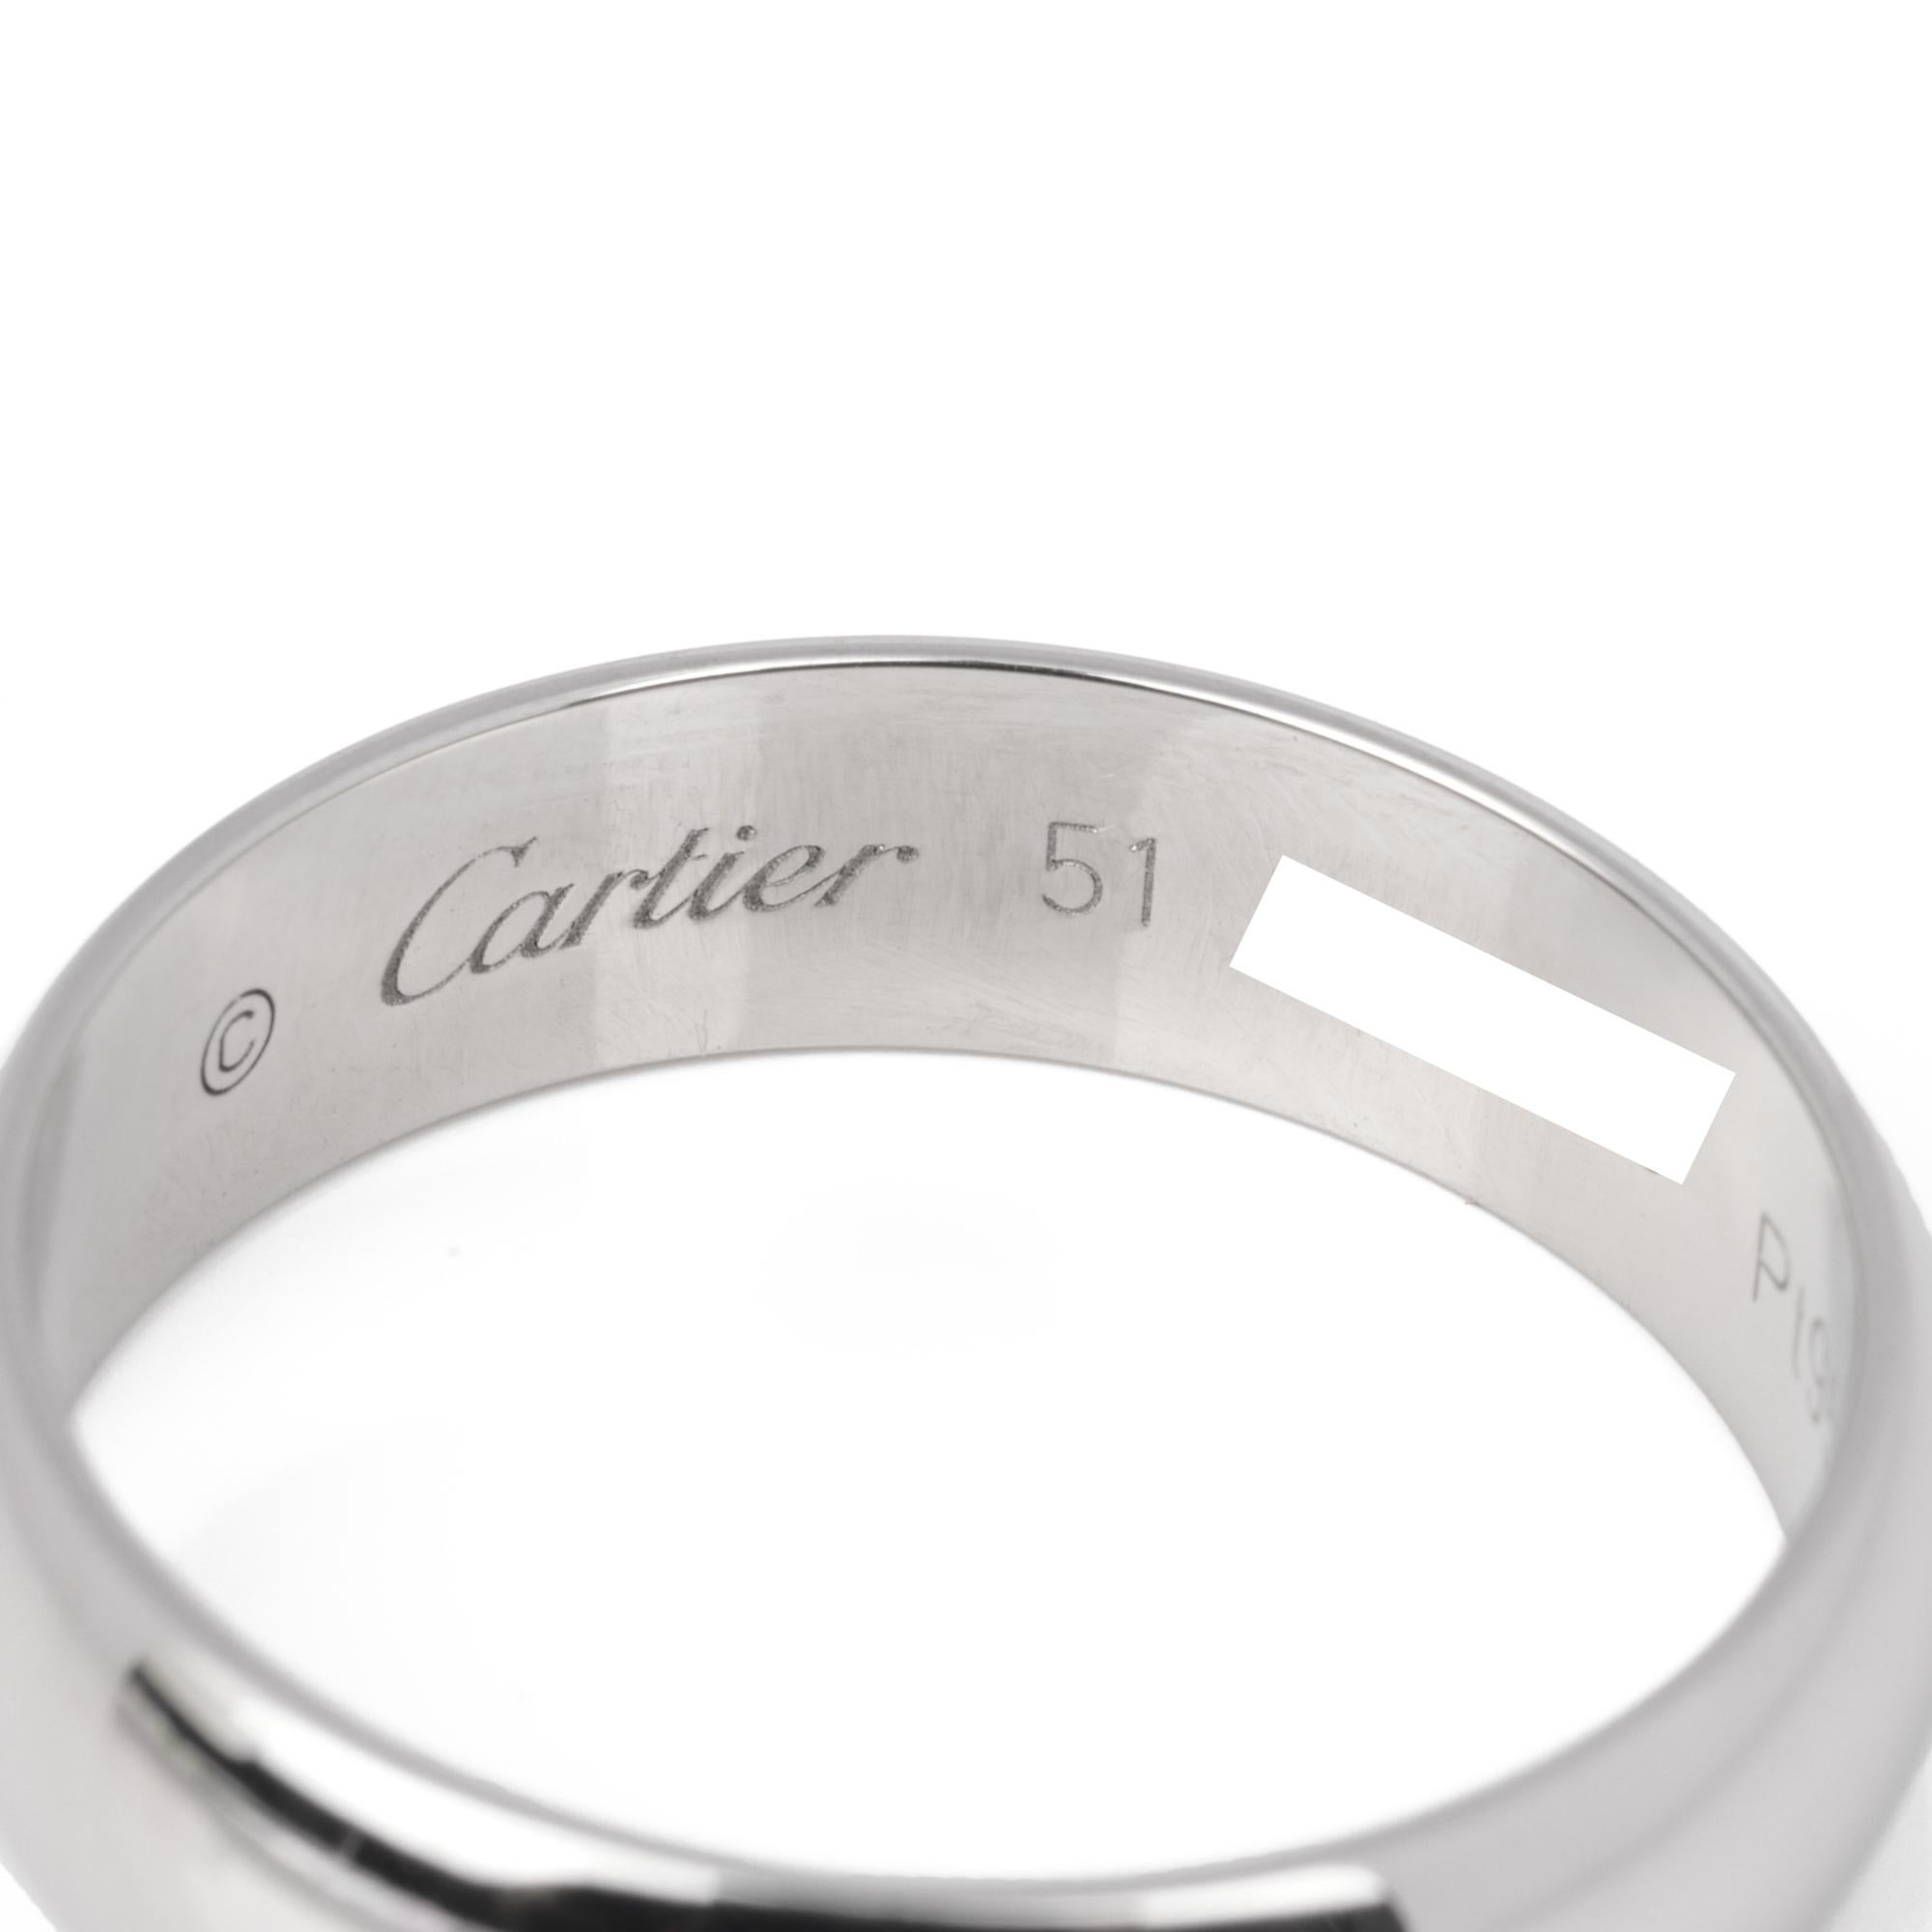 Cartier Platinum 5mm 1895 Wedding Band Ring

Brand Cartier
Model 1895 Wedding Band
Product Type Ring
Serial Number FU****
Accompanied By Cartier Box, Certificate
Material(s) Platinum
UK Ring Size L
EU Ring Size 51
US Ring Size 6
Resizing Possible